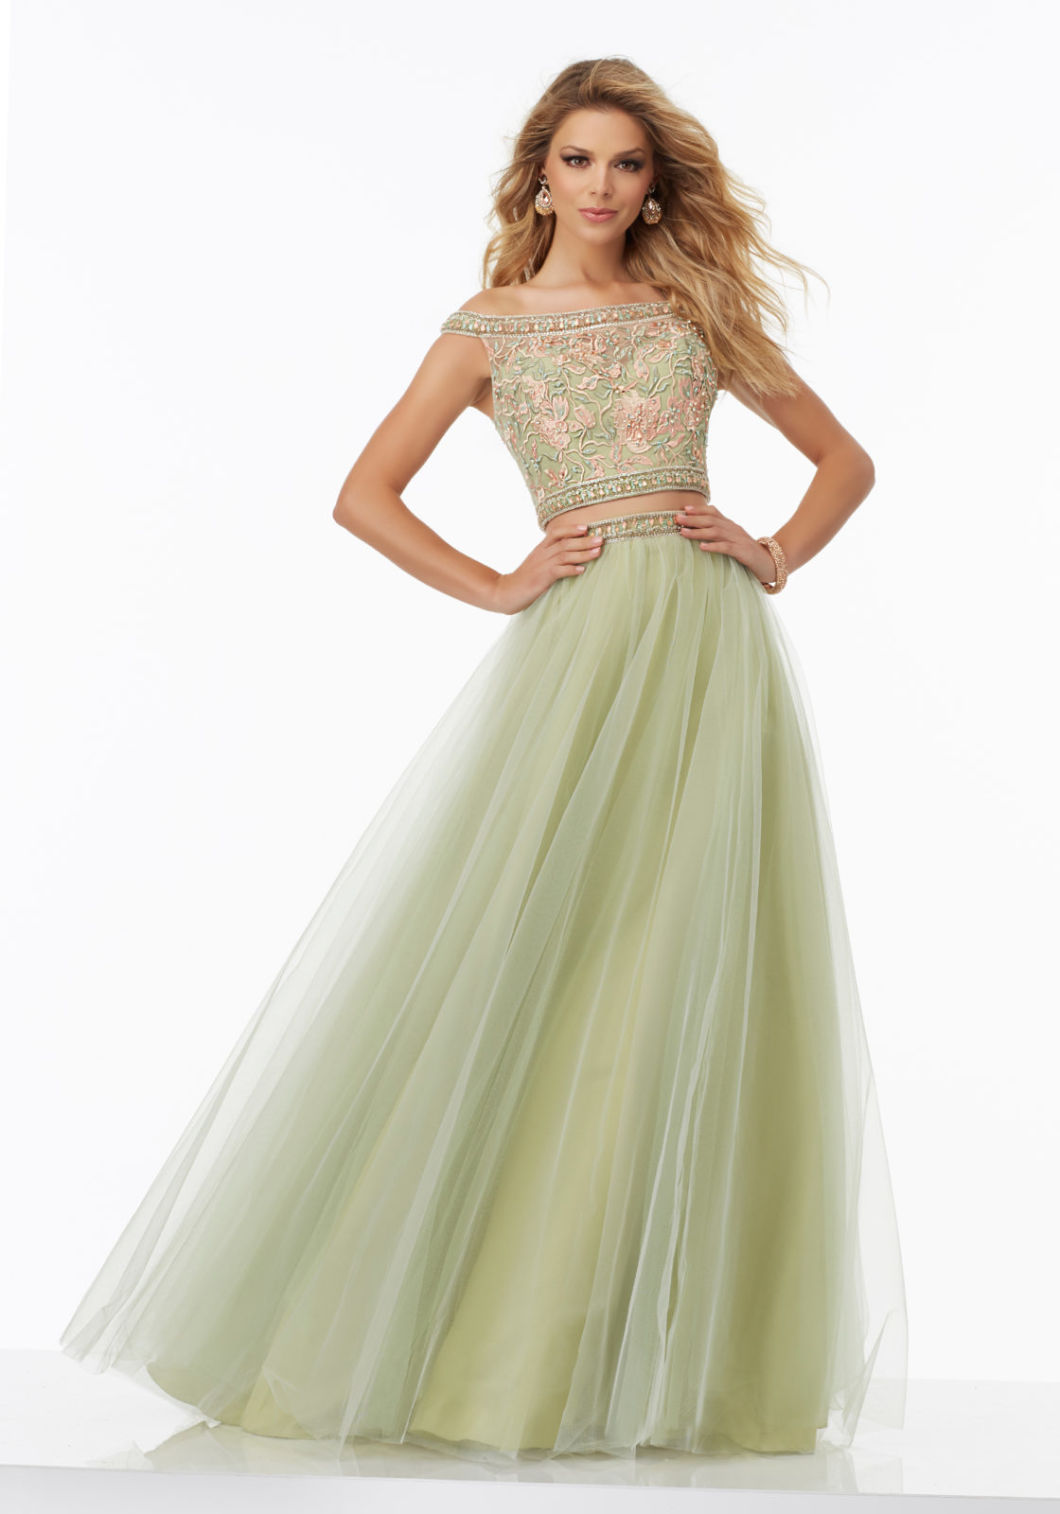 2018 New Cocktail Party Evening Prom Dresses Pd9923